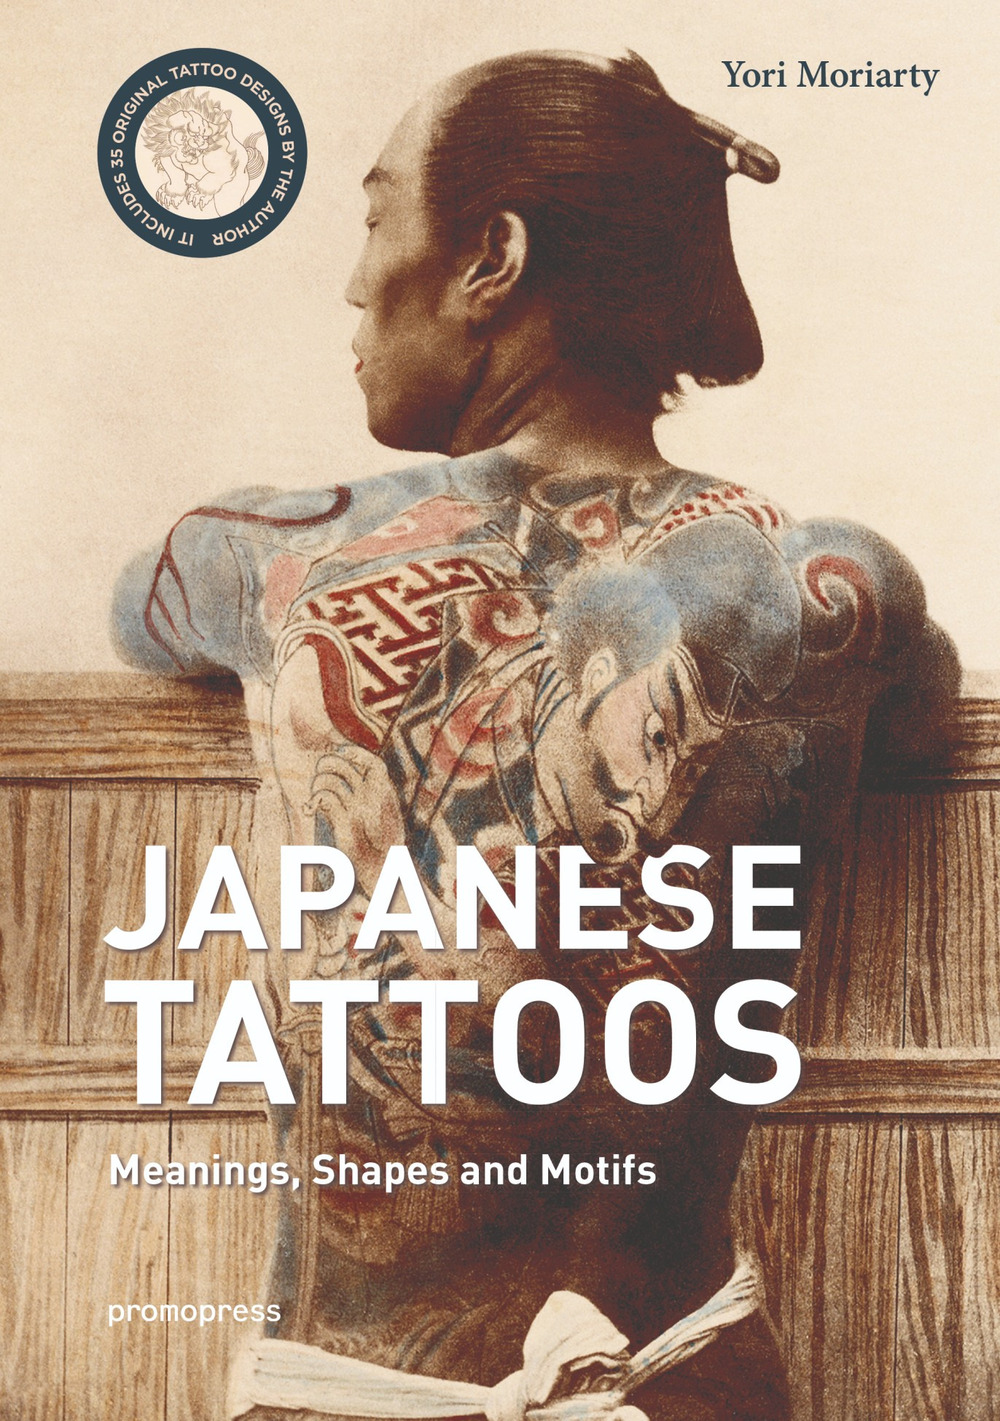 Japanese tattoos. Meanings, shapes and motifs